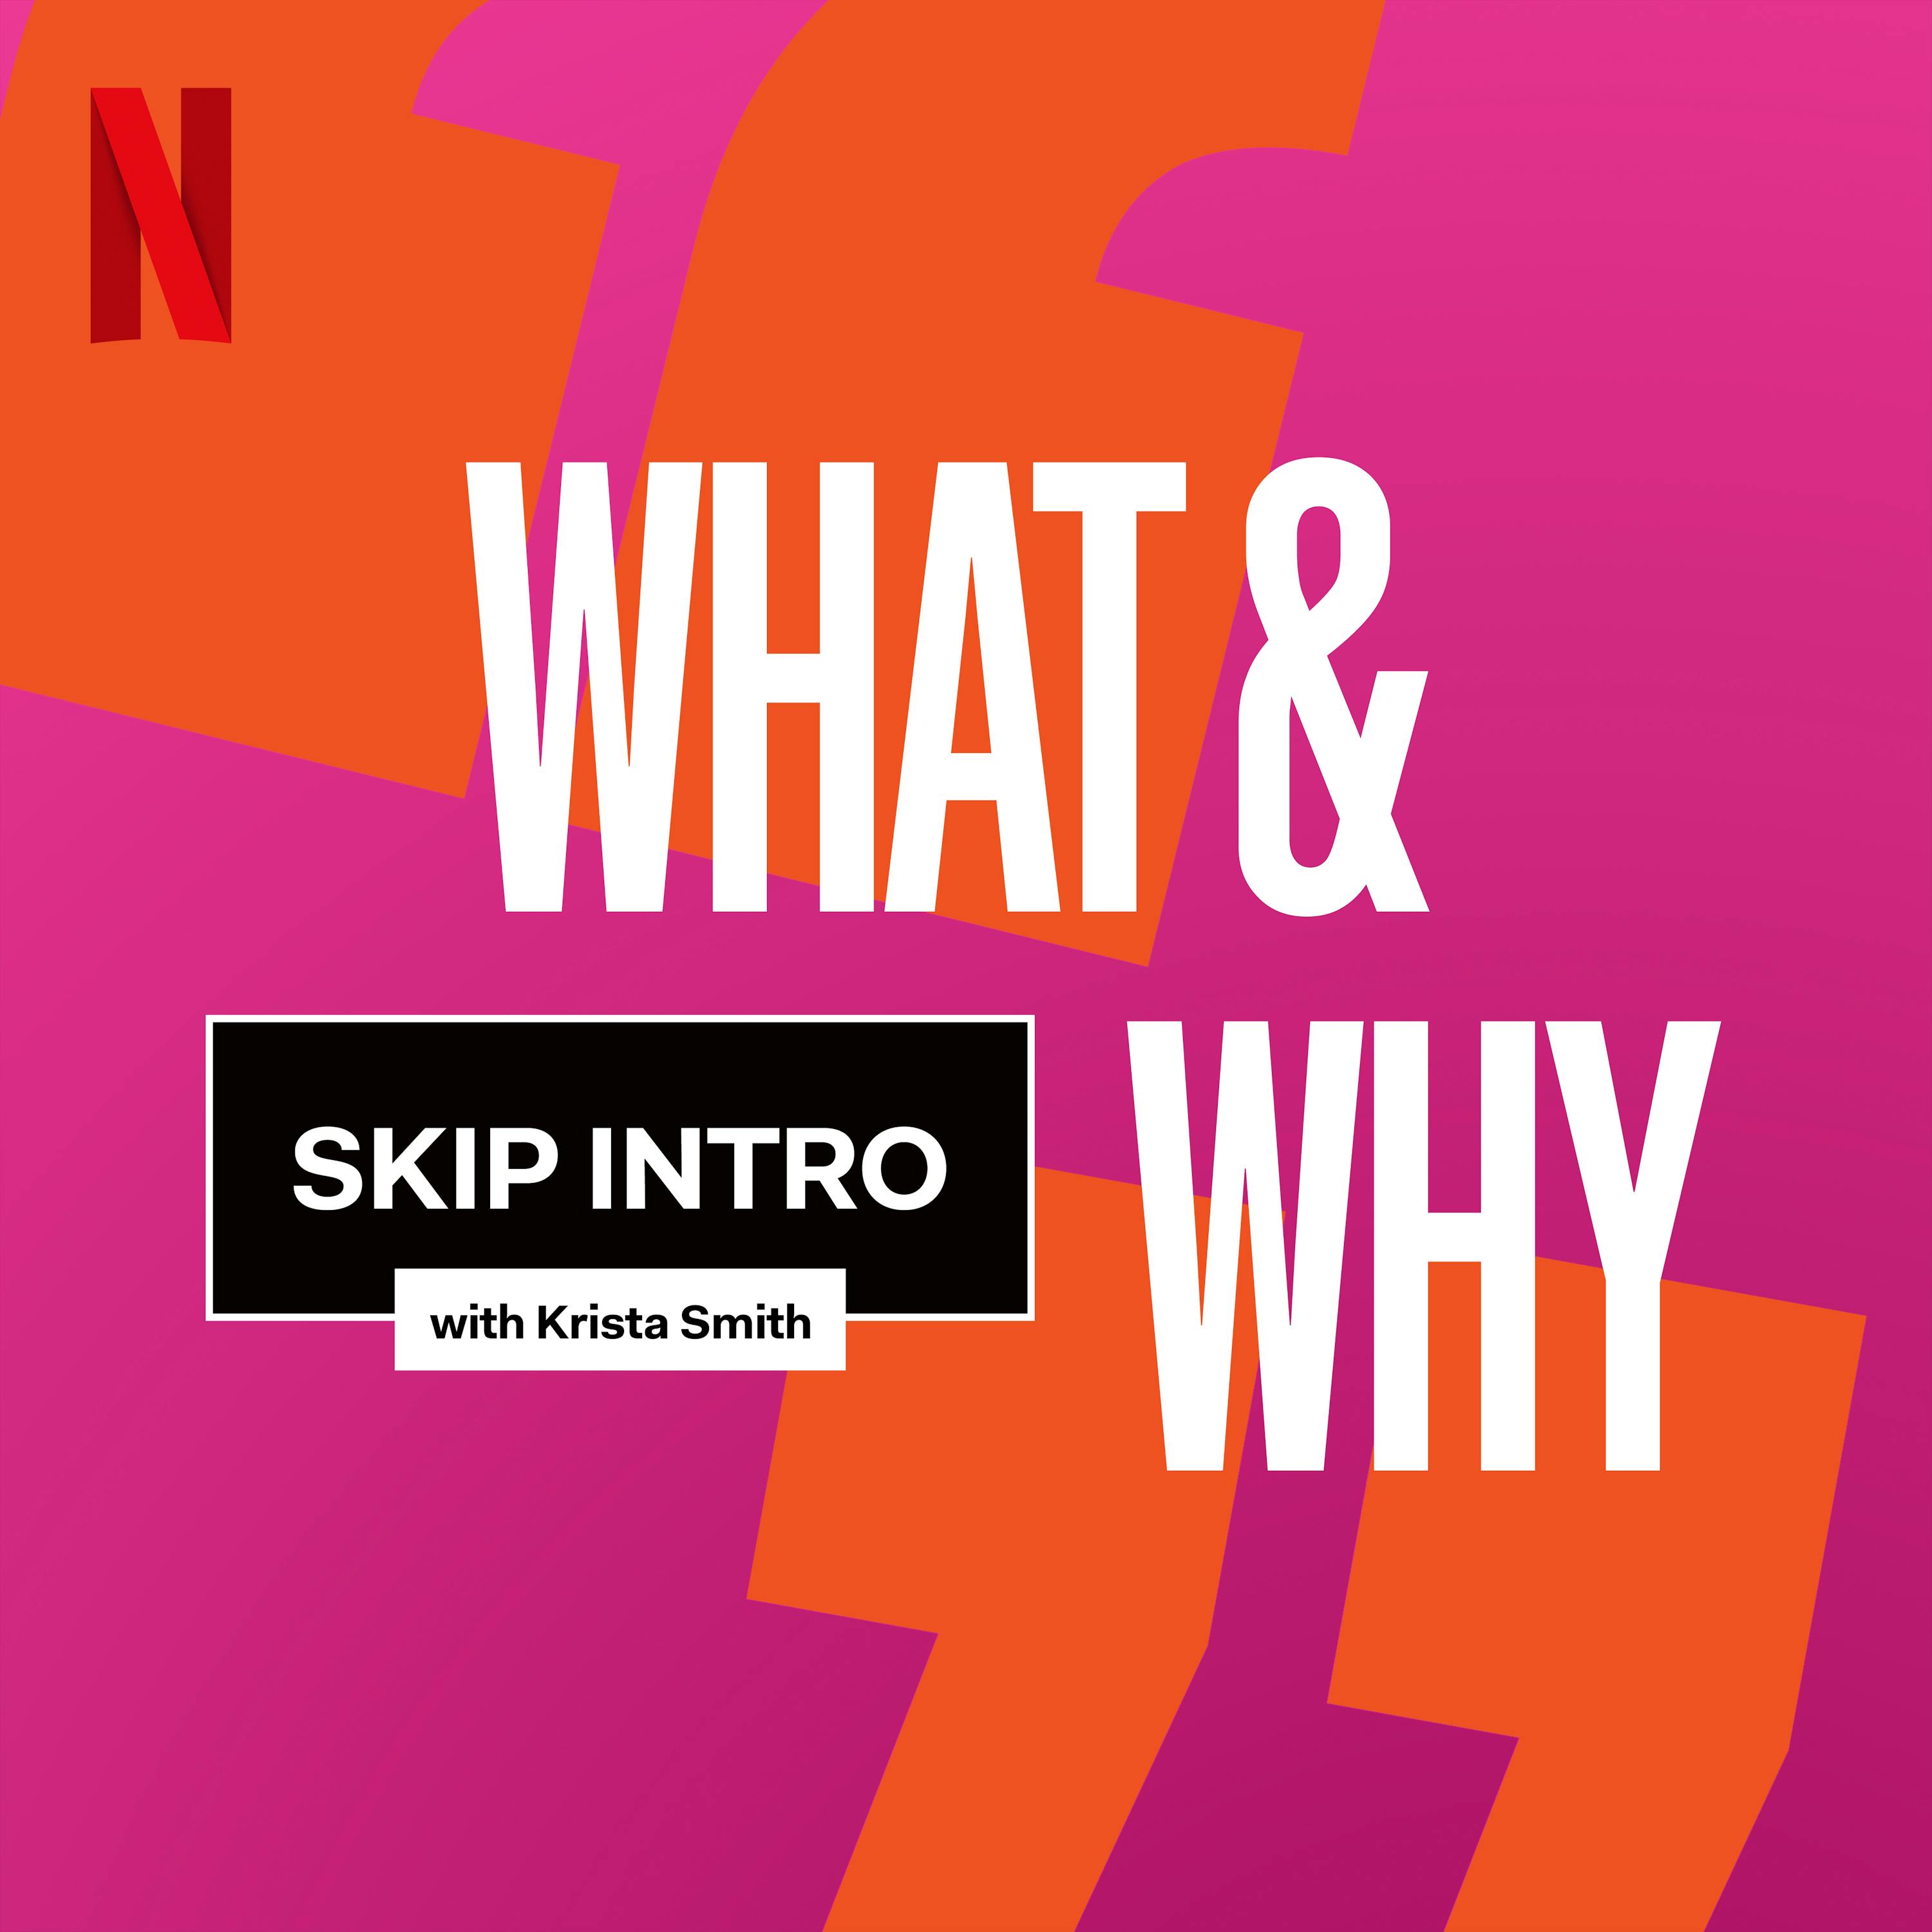 What & Why (Unbreakable Kimmy Schmidt)